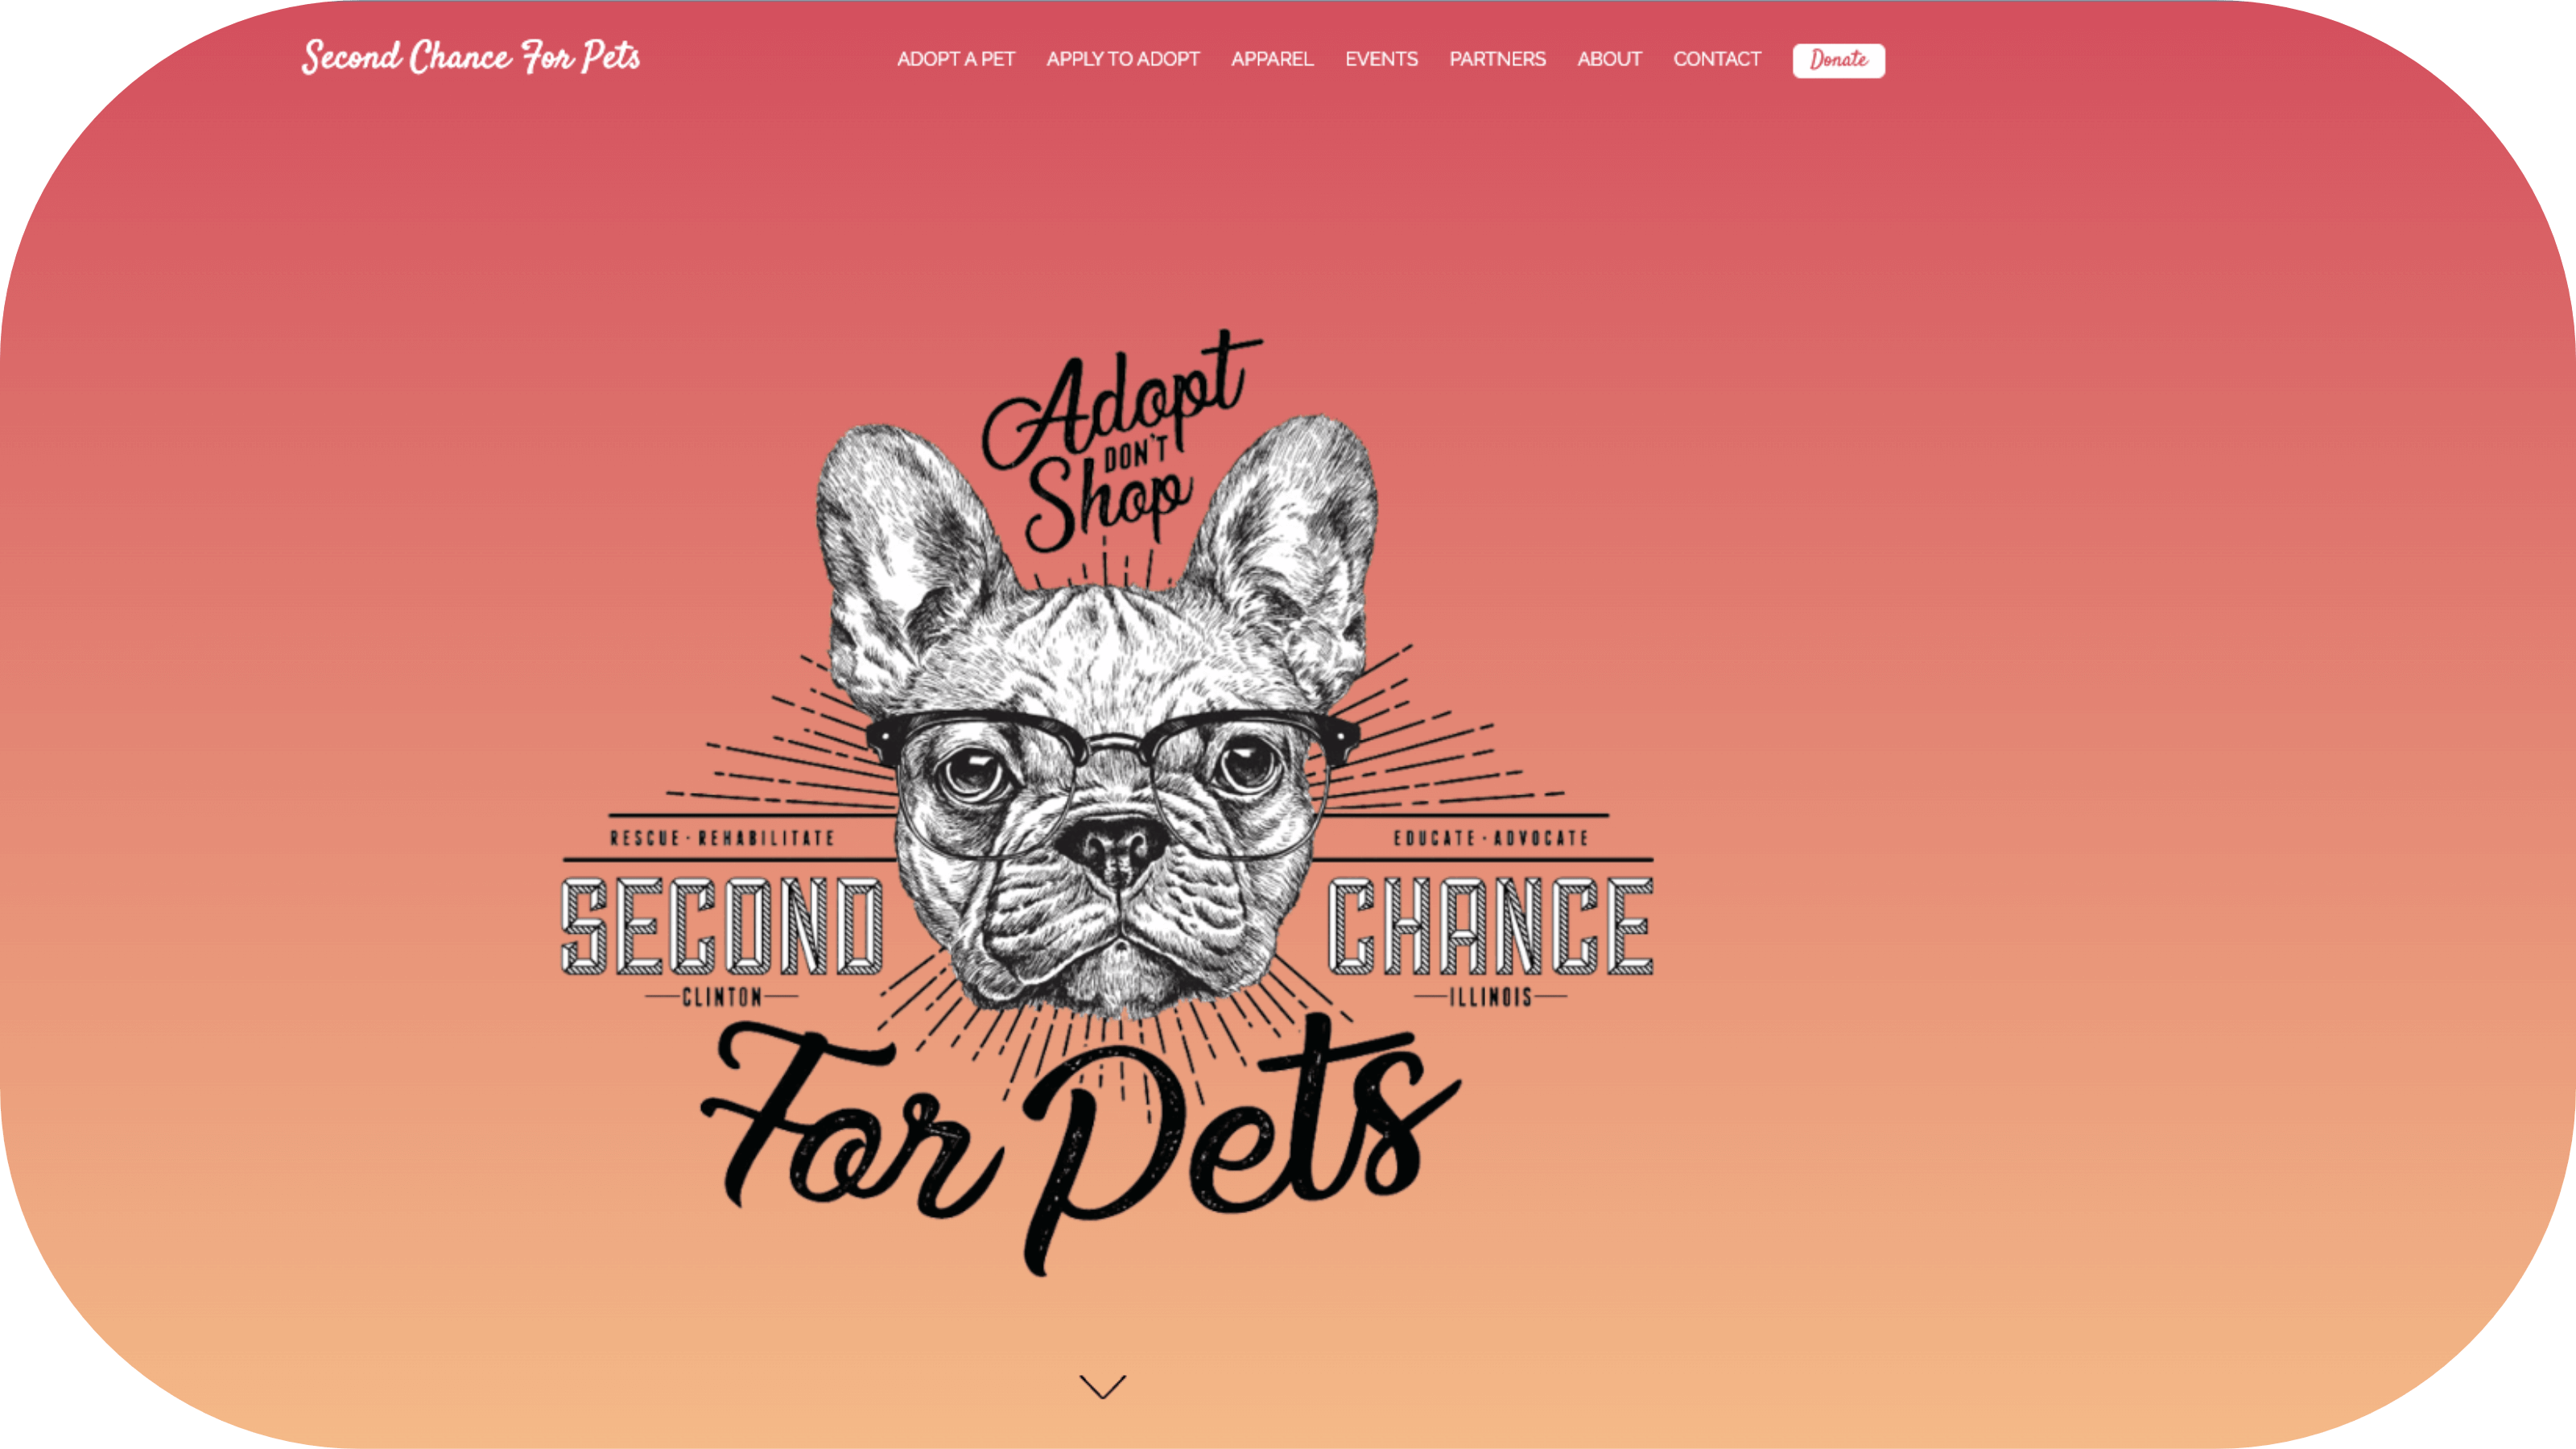 Second Chance for Pets website banner